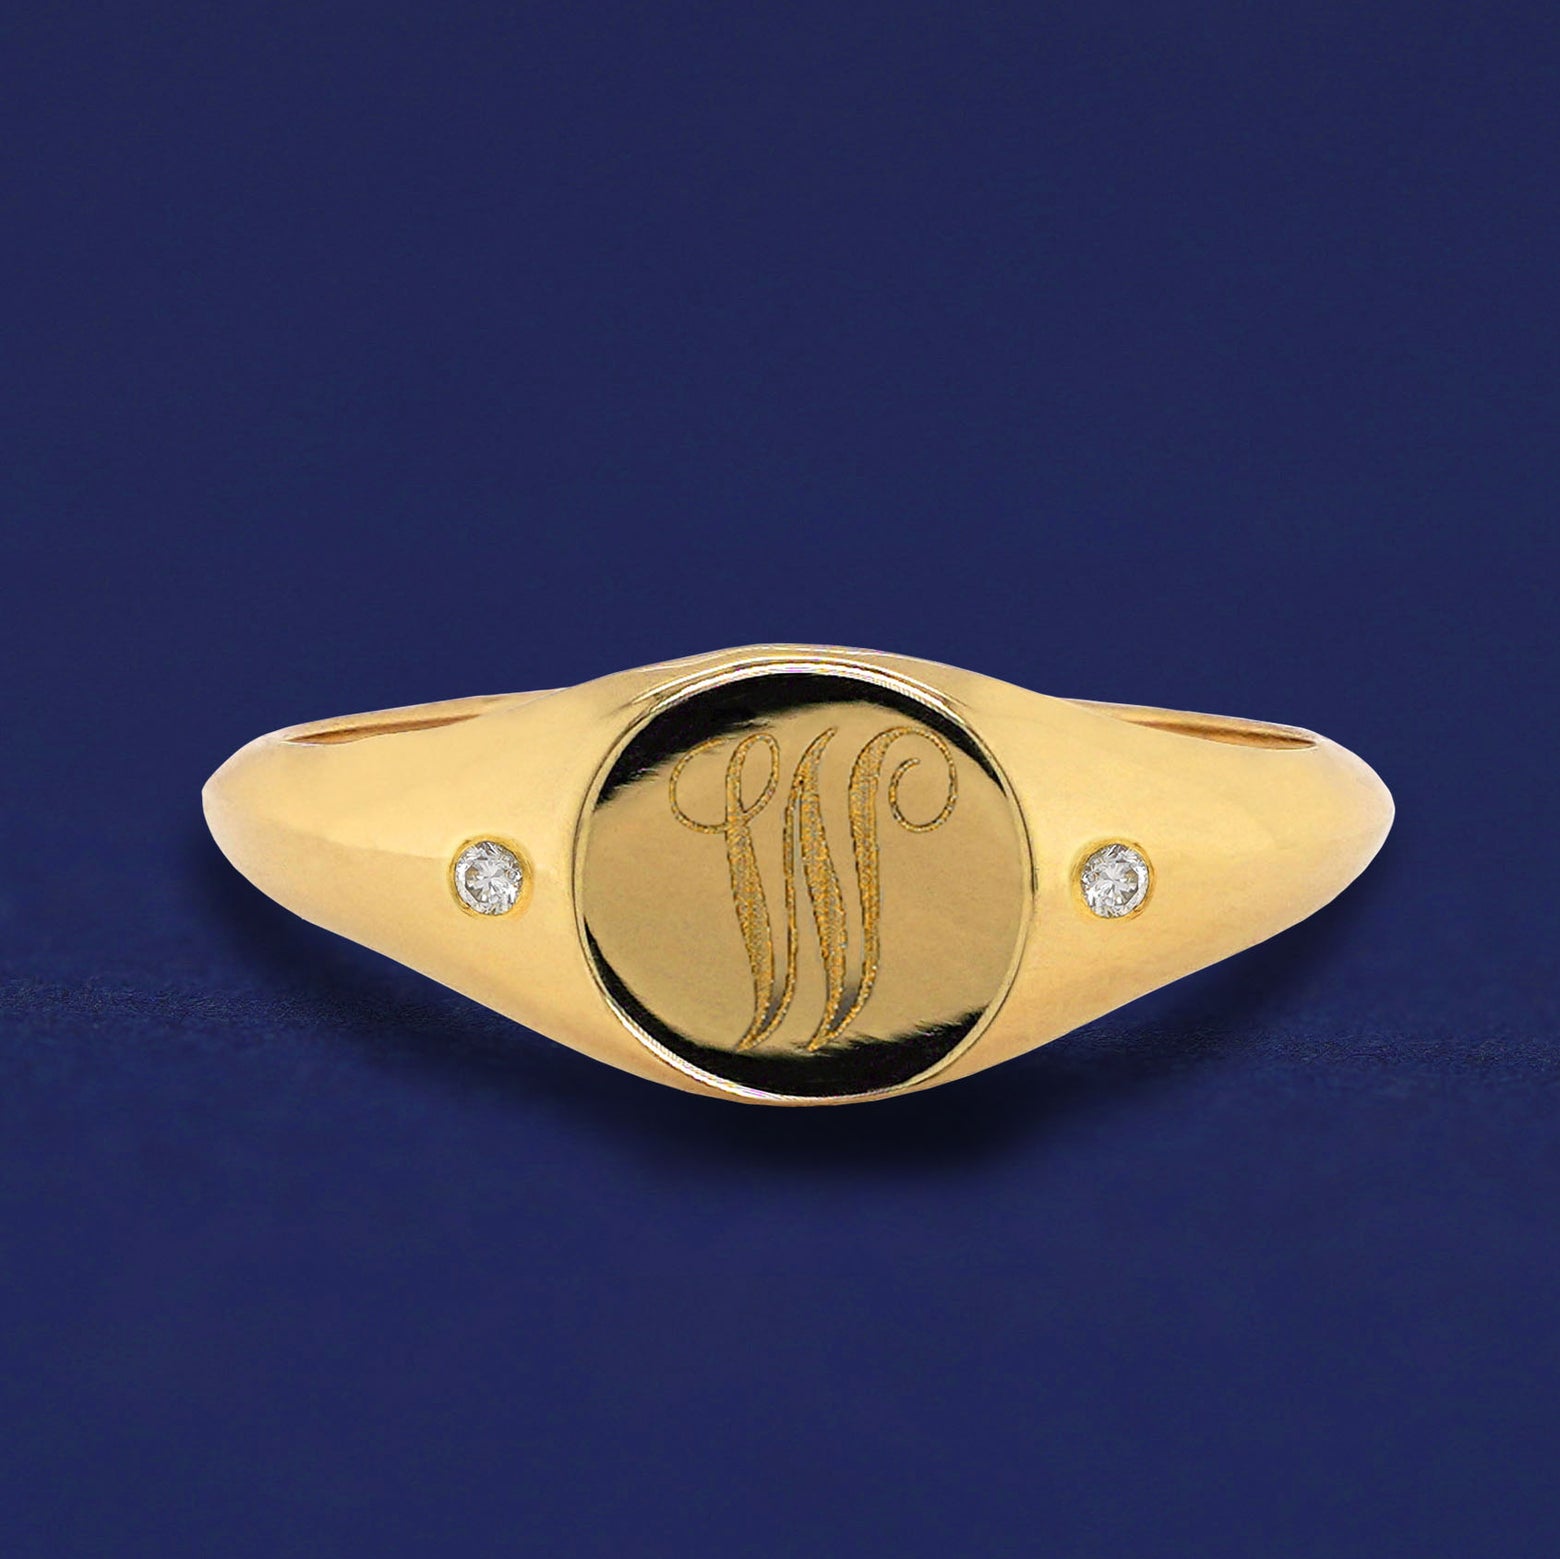 A solid yellow gold Diamond Signet Ring with the initial W engraved on the top in a script font